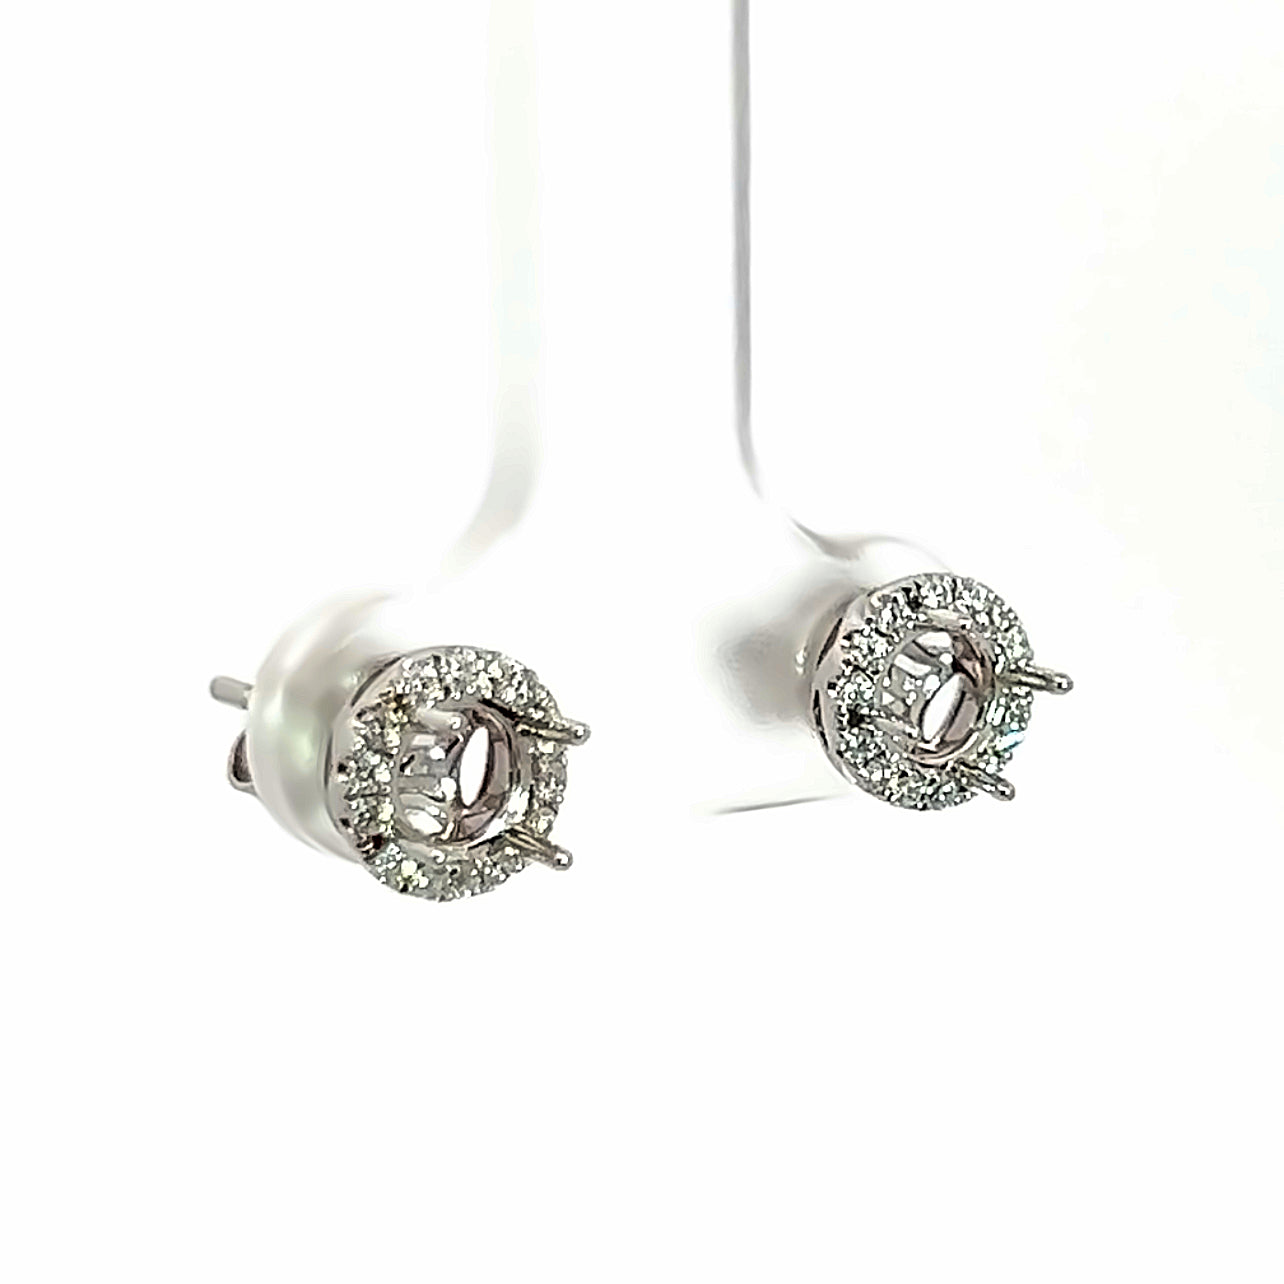 14kt wg smnt Earrings w/dia halo 0.15cts